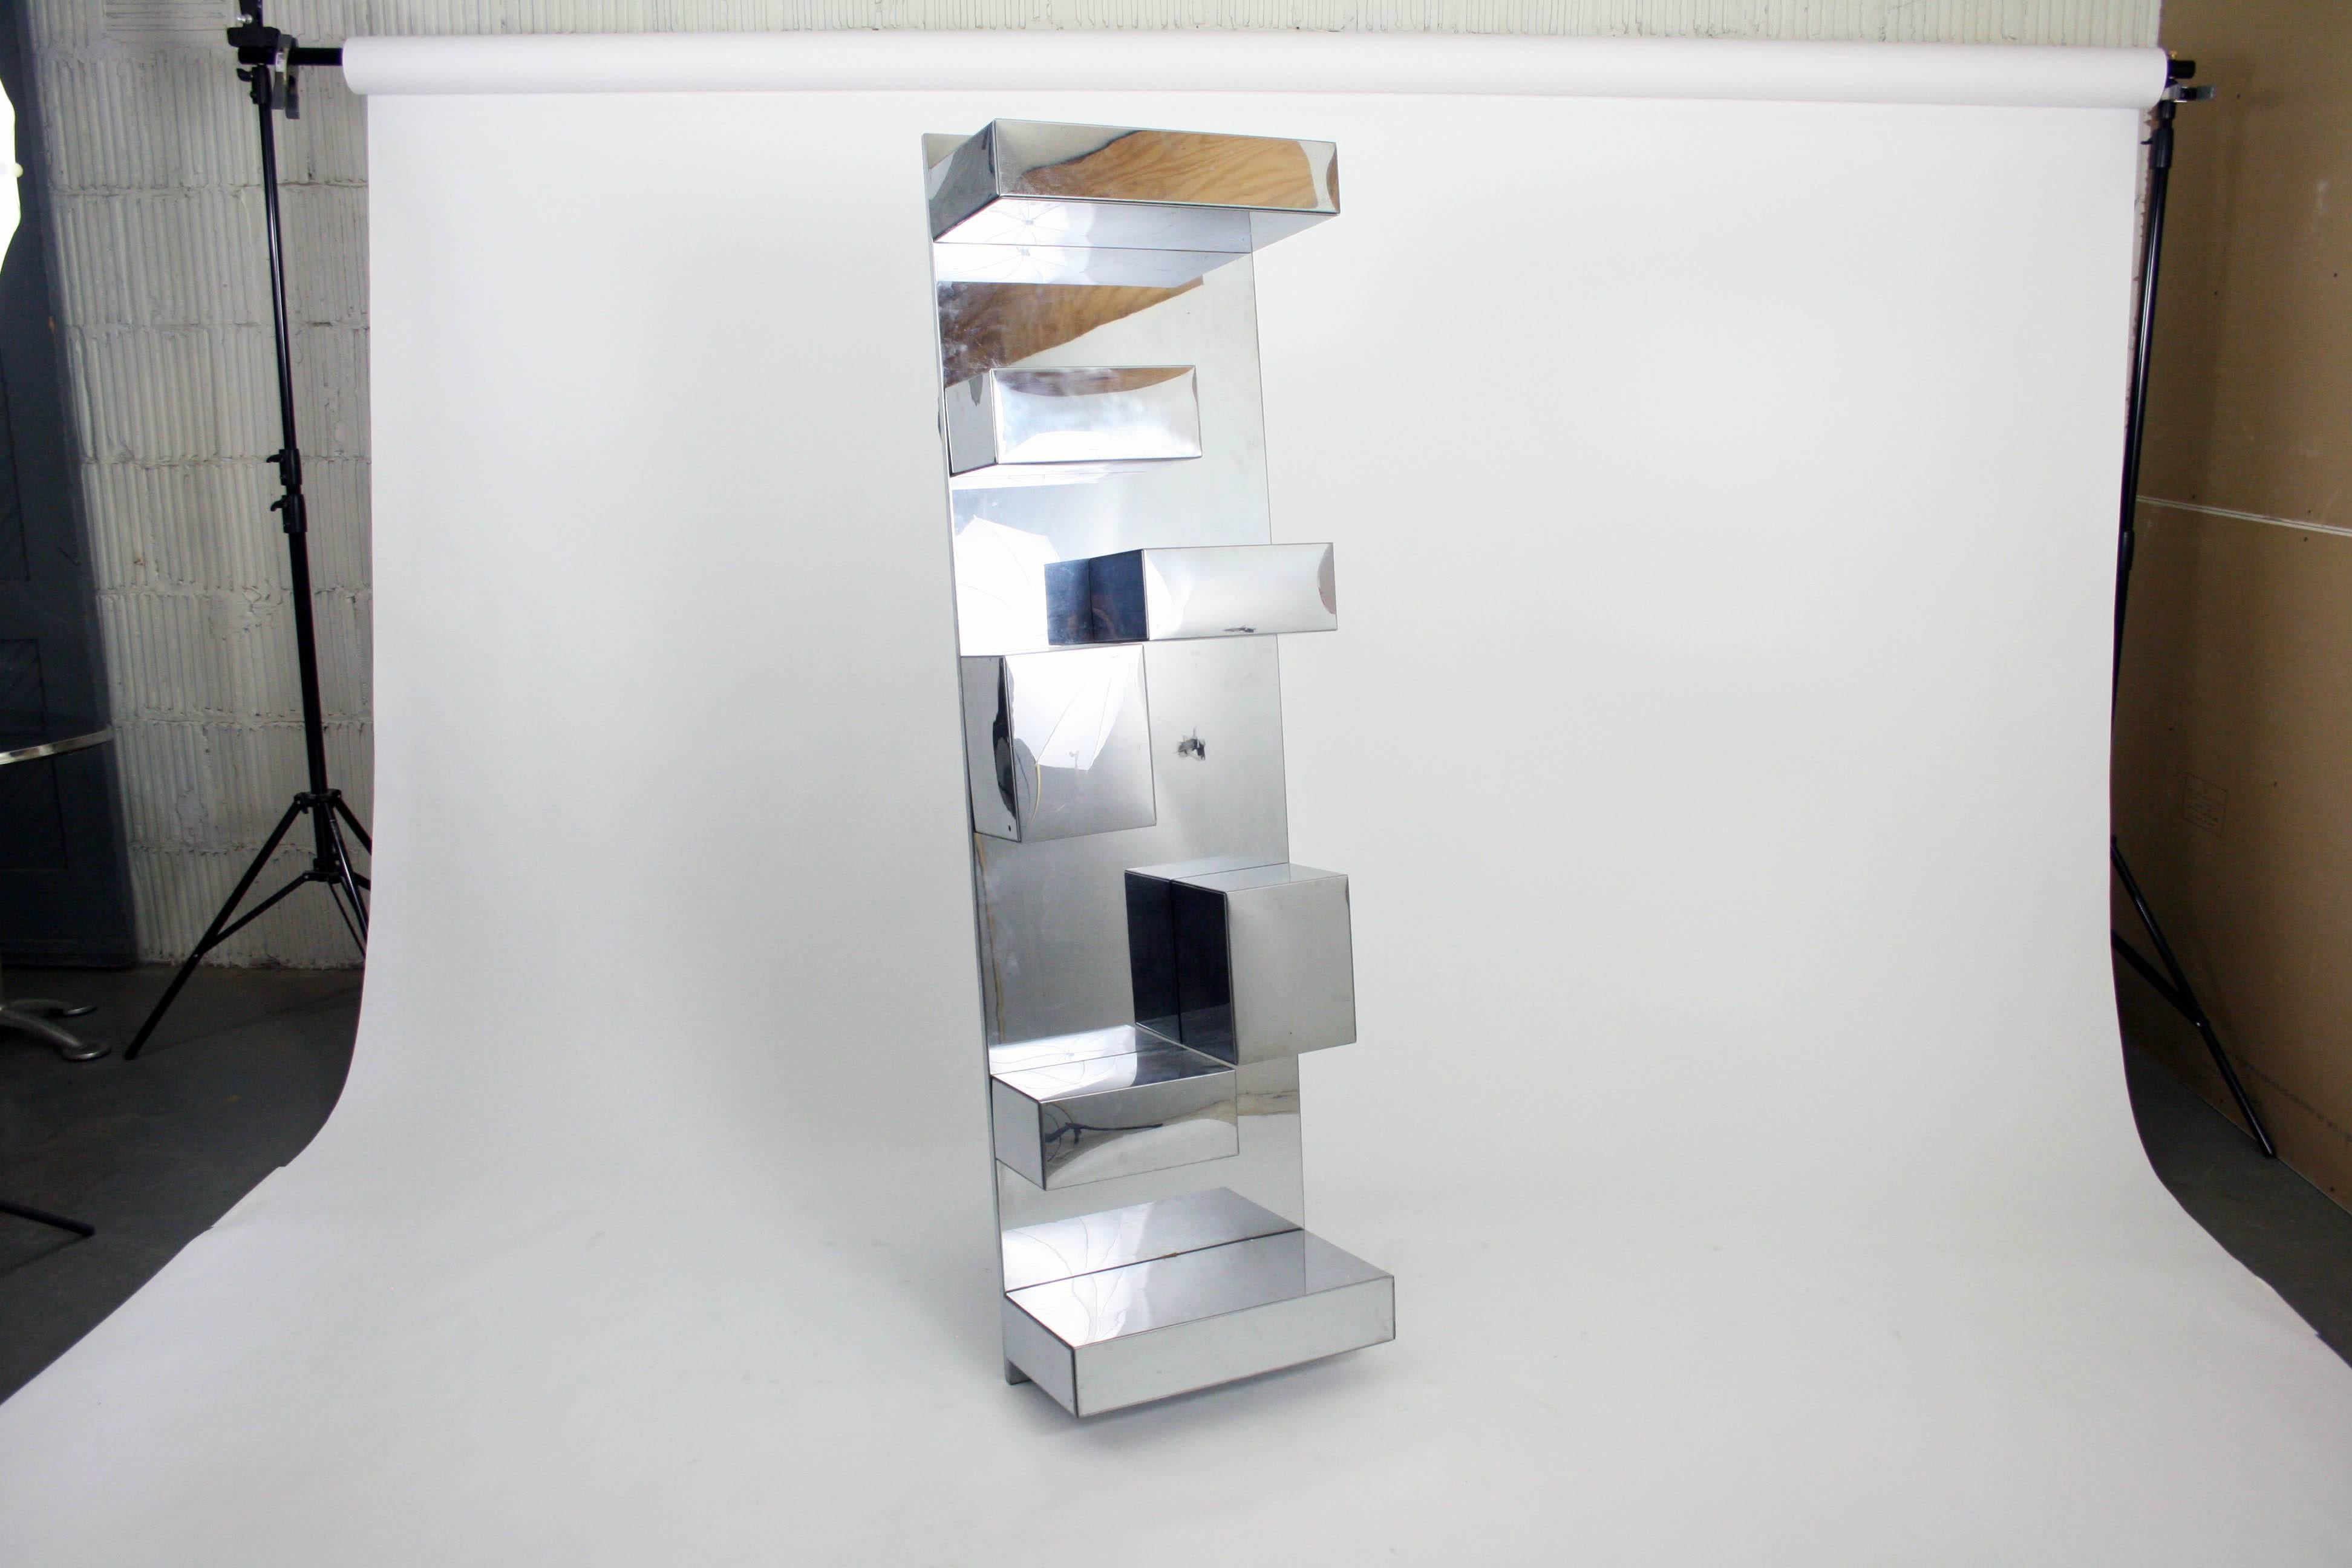 American 1970s Geometric Polished Metal Wall Sculpture, Shelf Attributed to Curis Jere